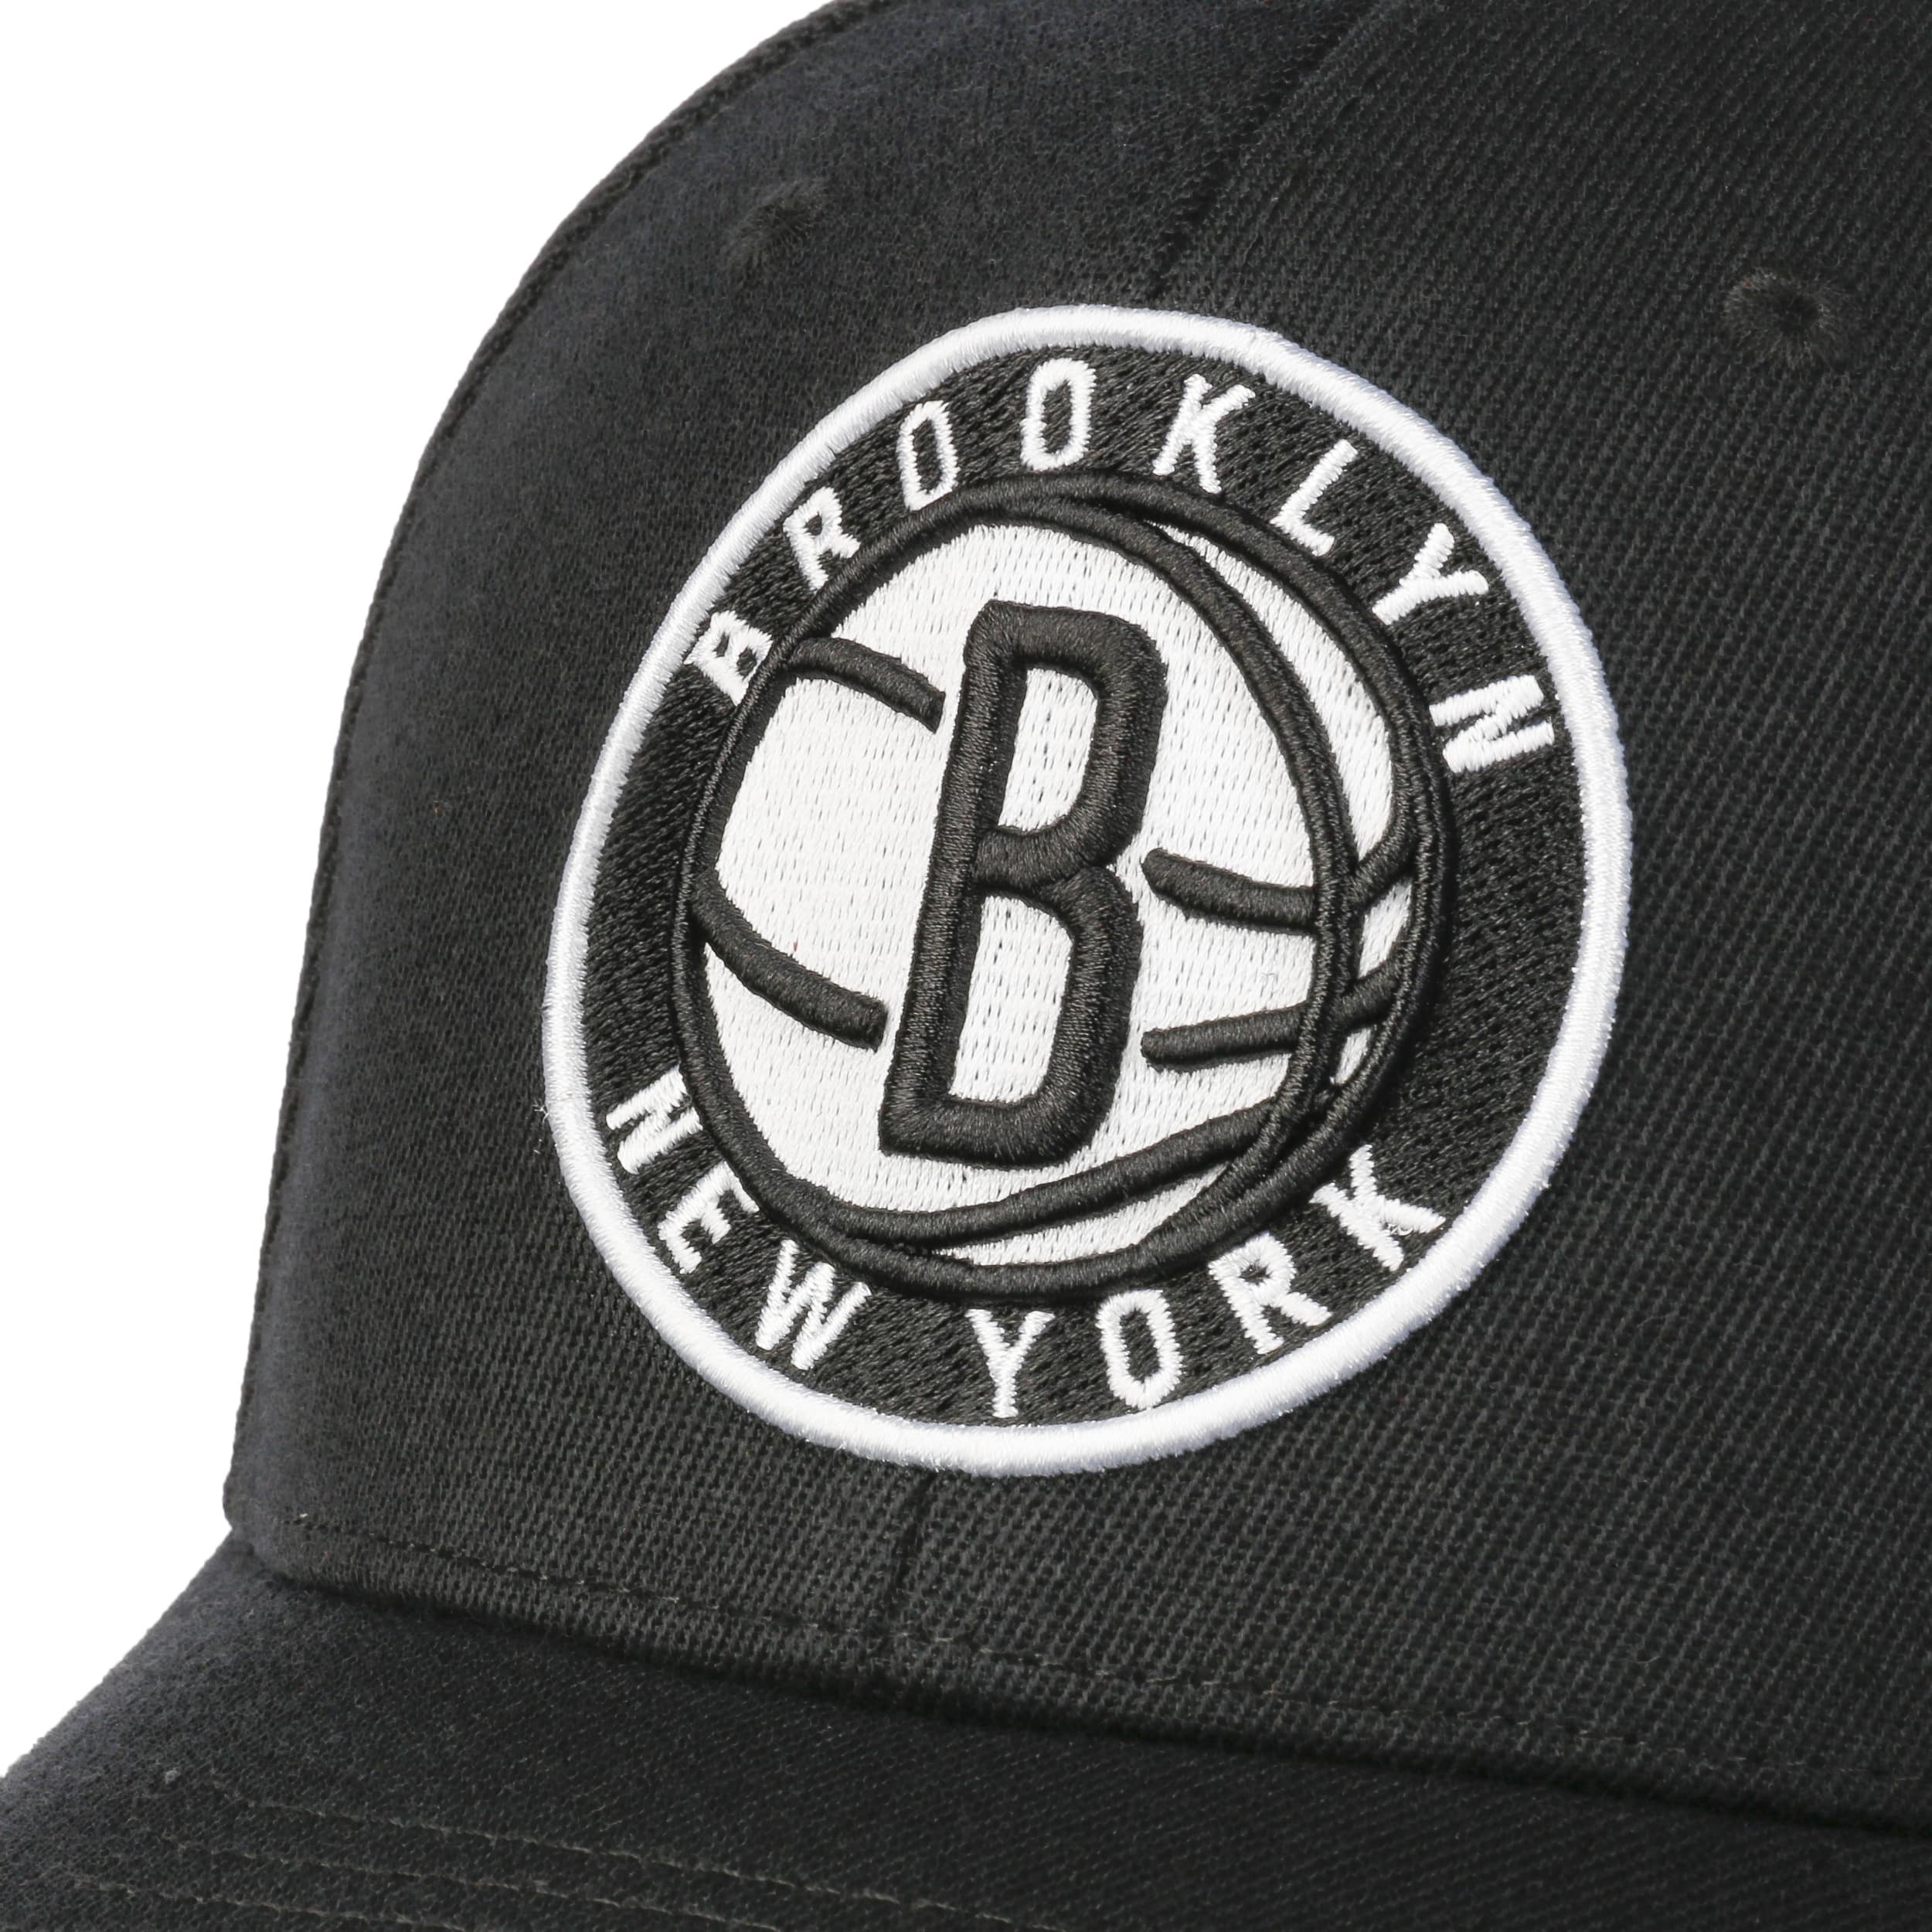 Brooklyn Nets Cap by Mitchell & Ness - 42,95 €